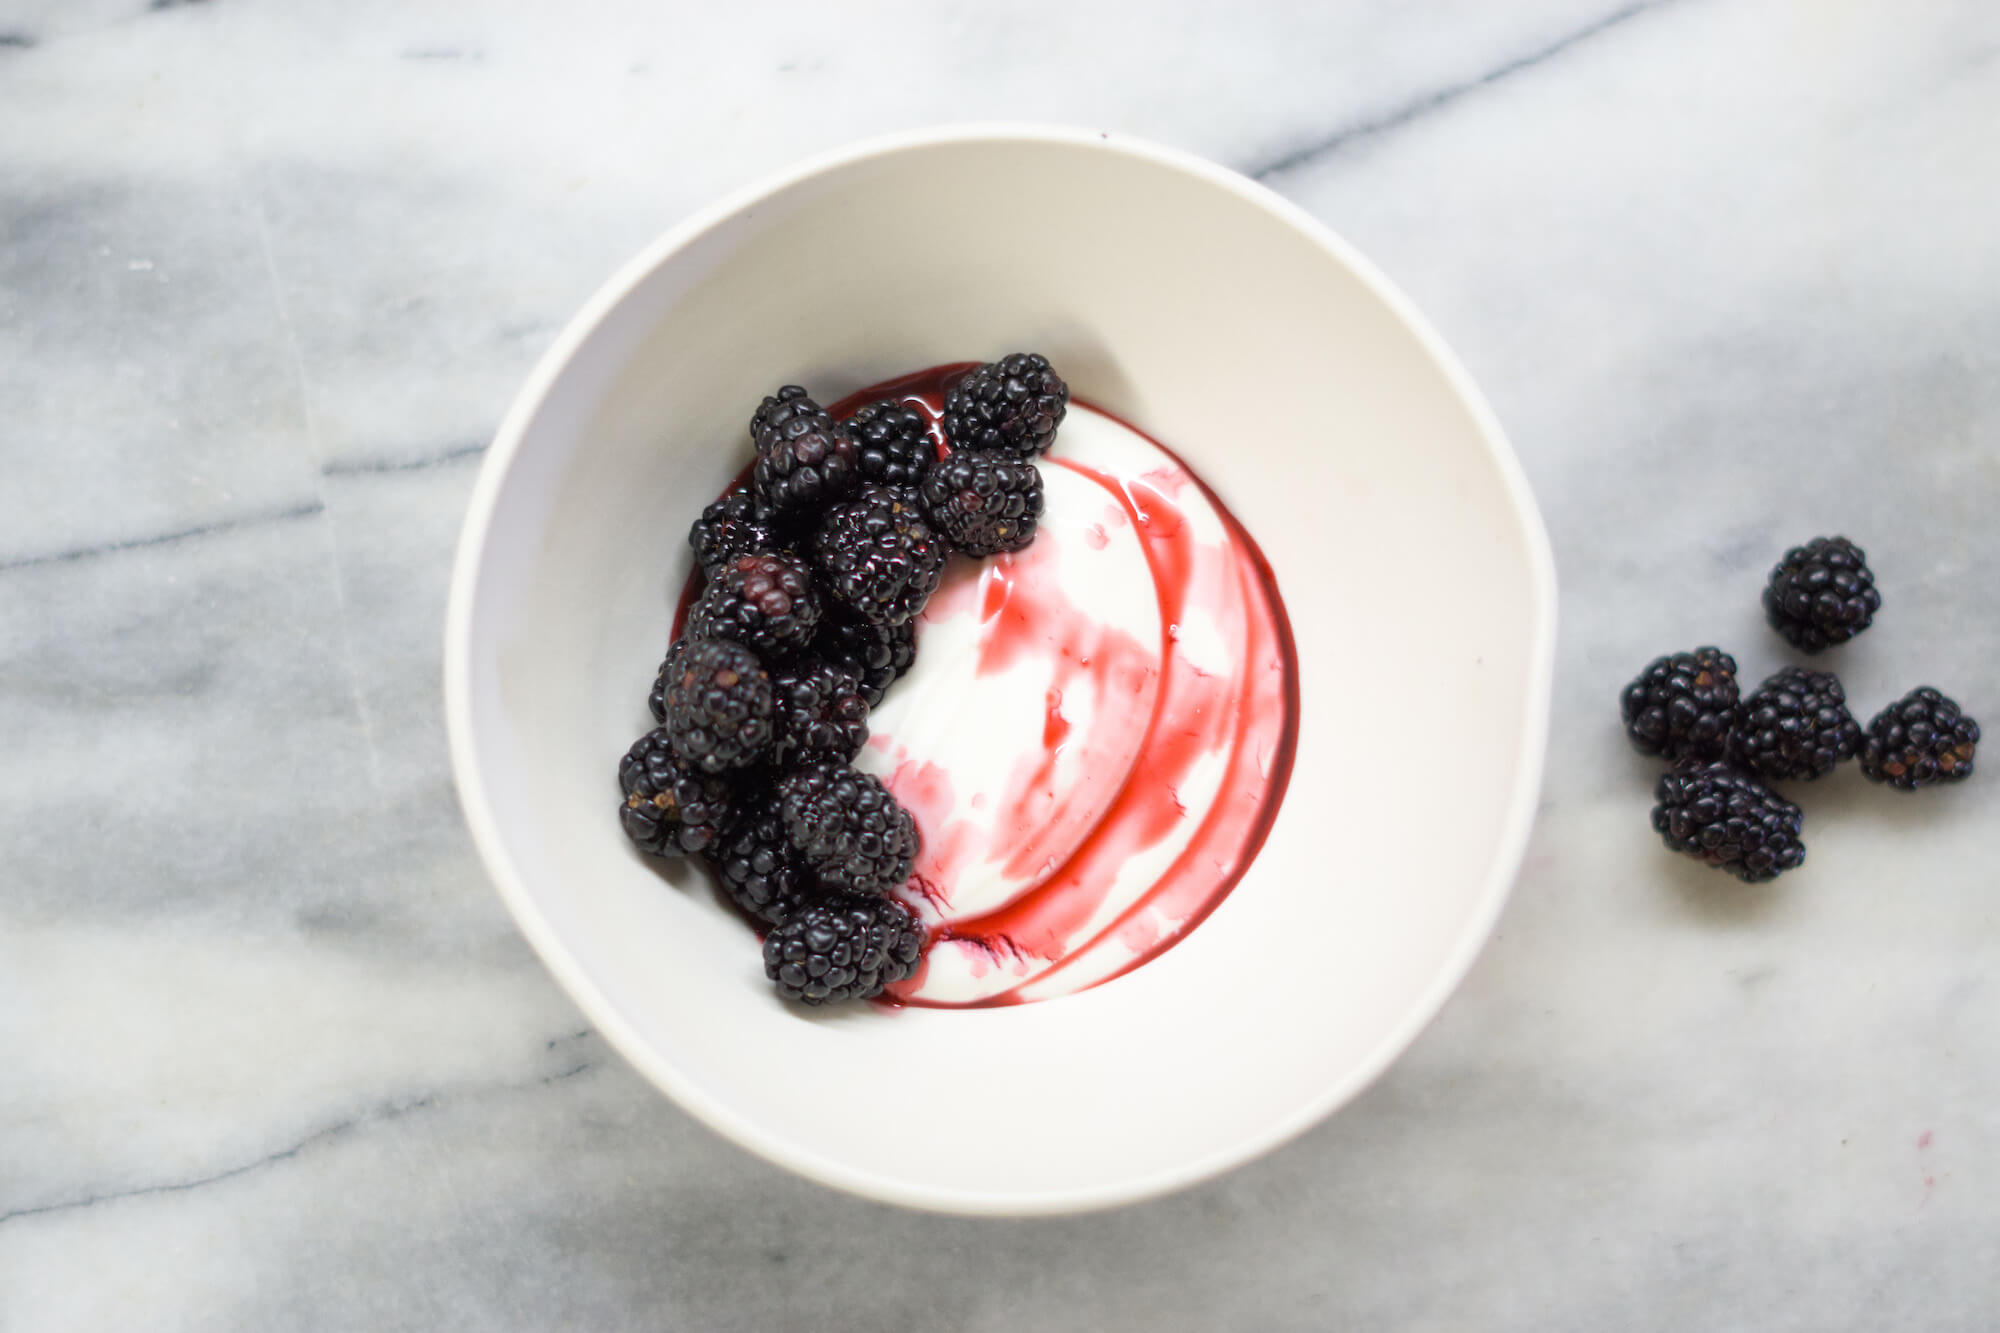 Skyr is a type of fresh cheese made traditionally in Iceland, similar in texture to yogurt